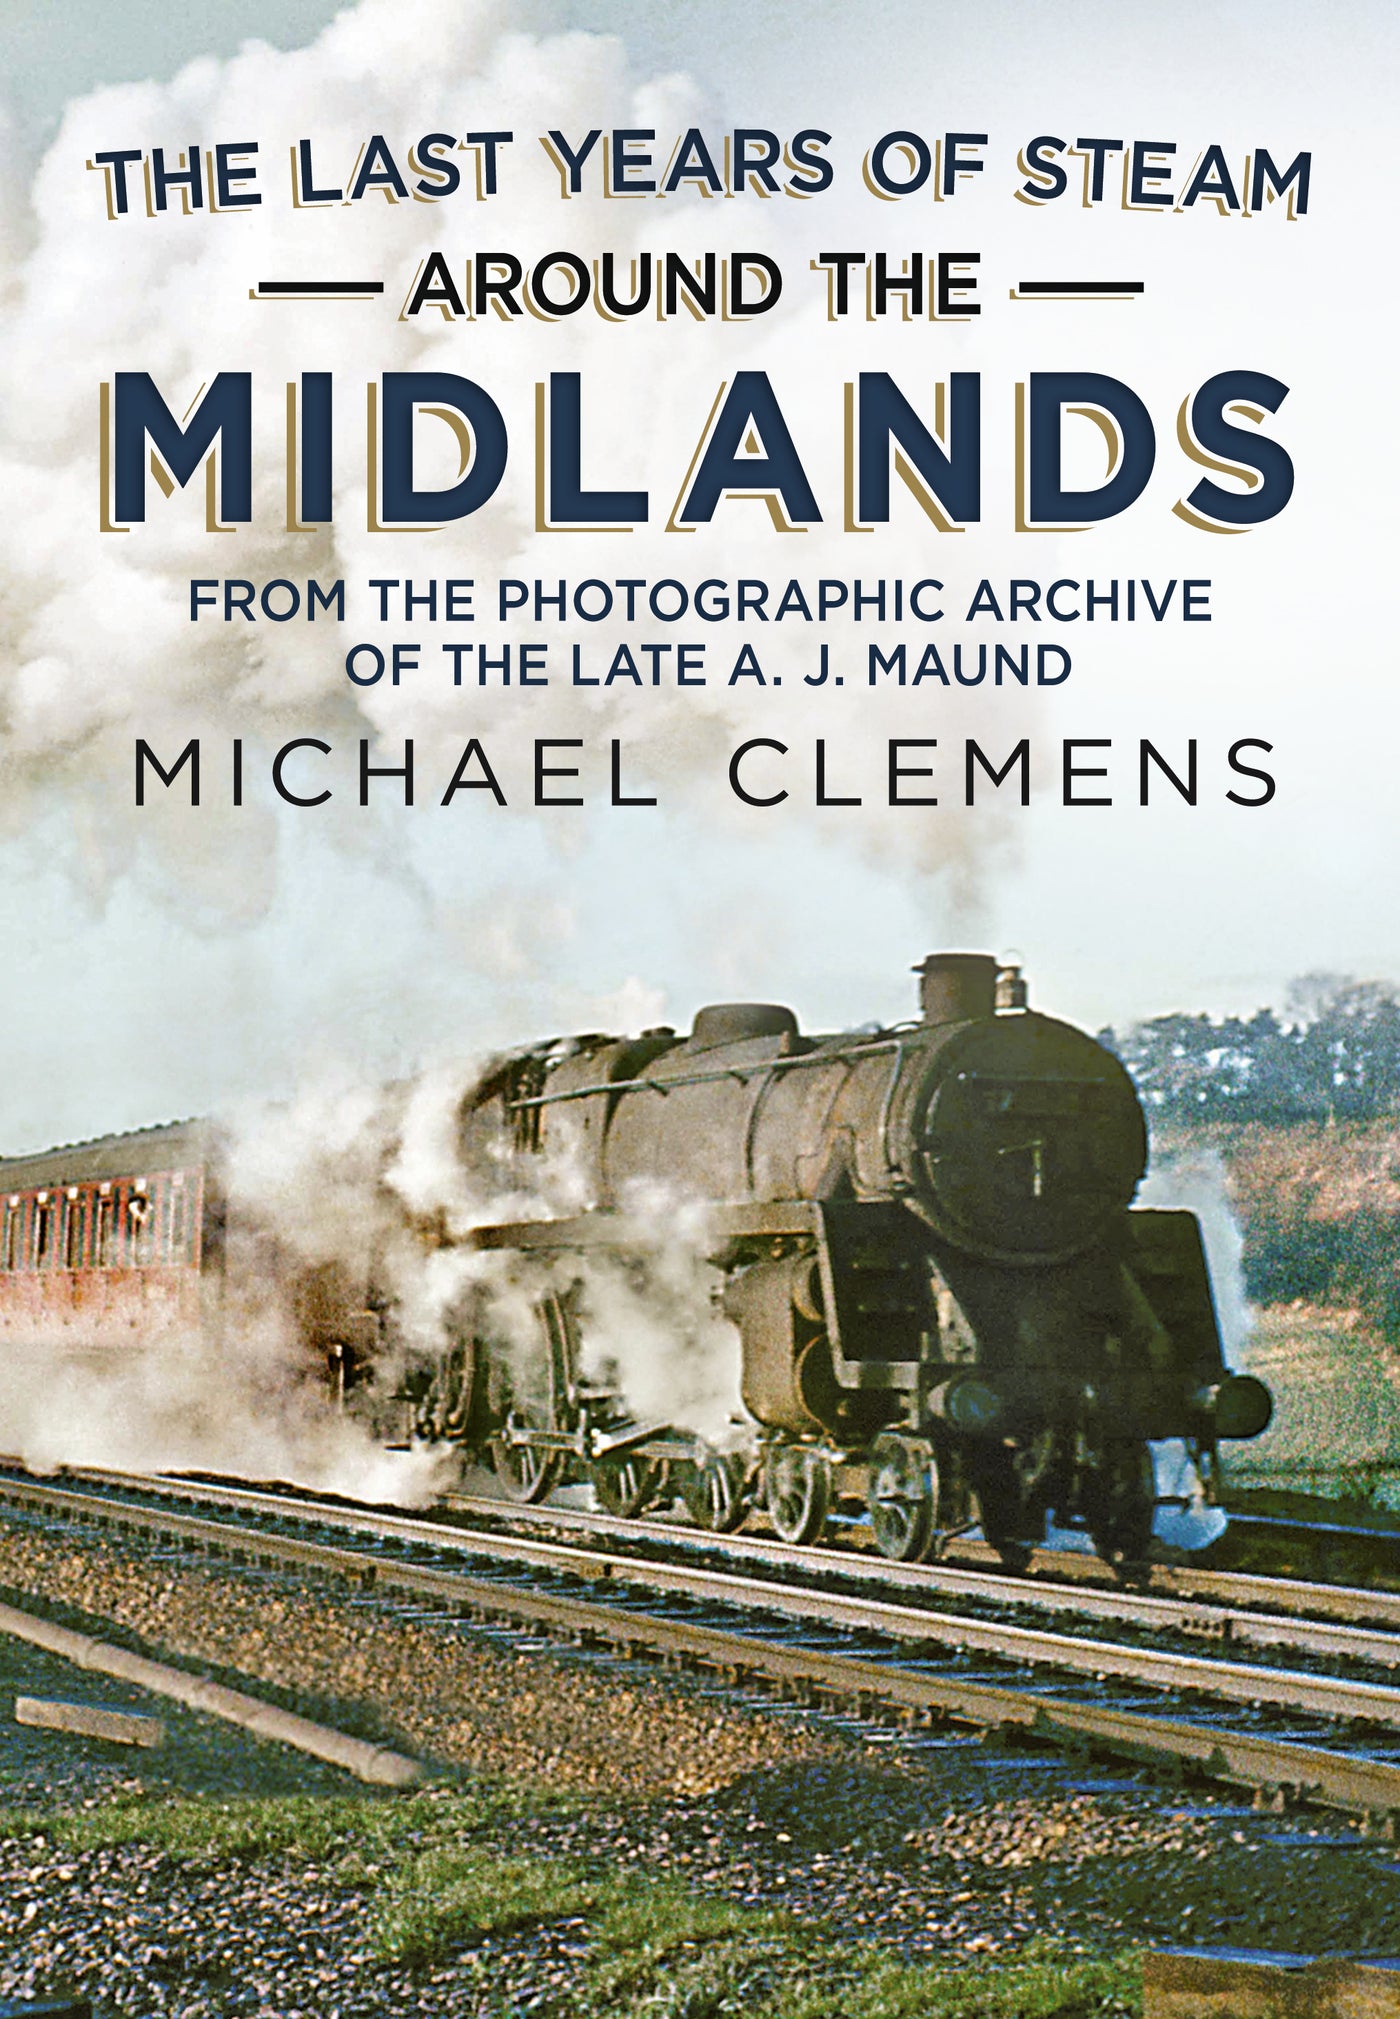 The Last Years of Steam Around The Midlands